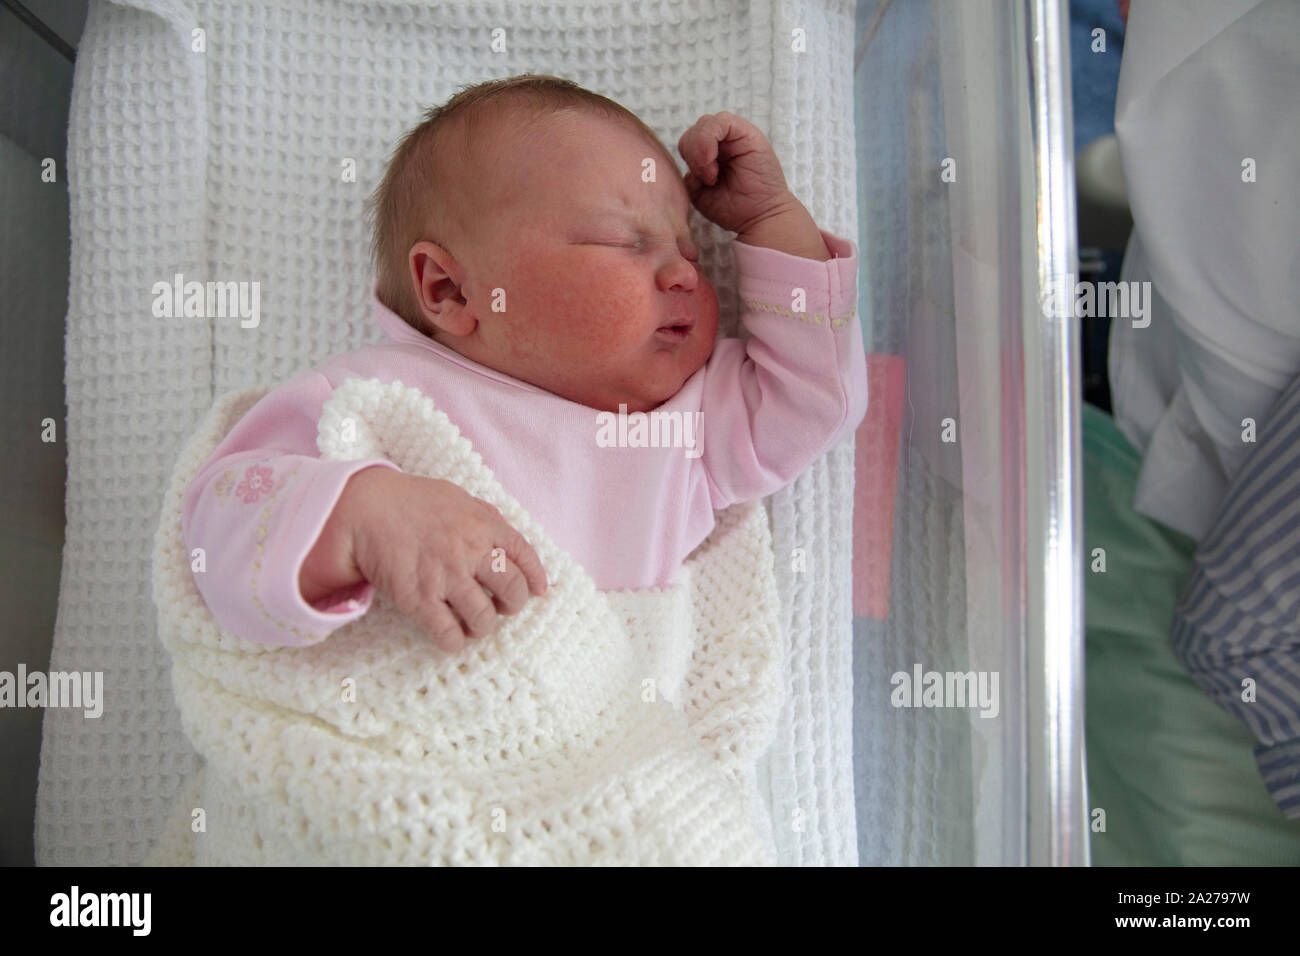 A cute one day old baby asleep in a hospital cot Stock Photo